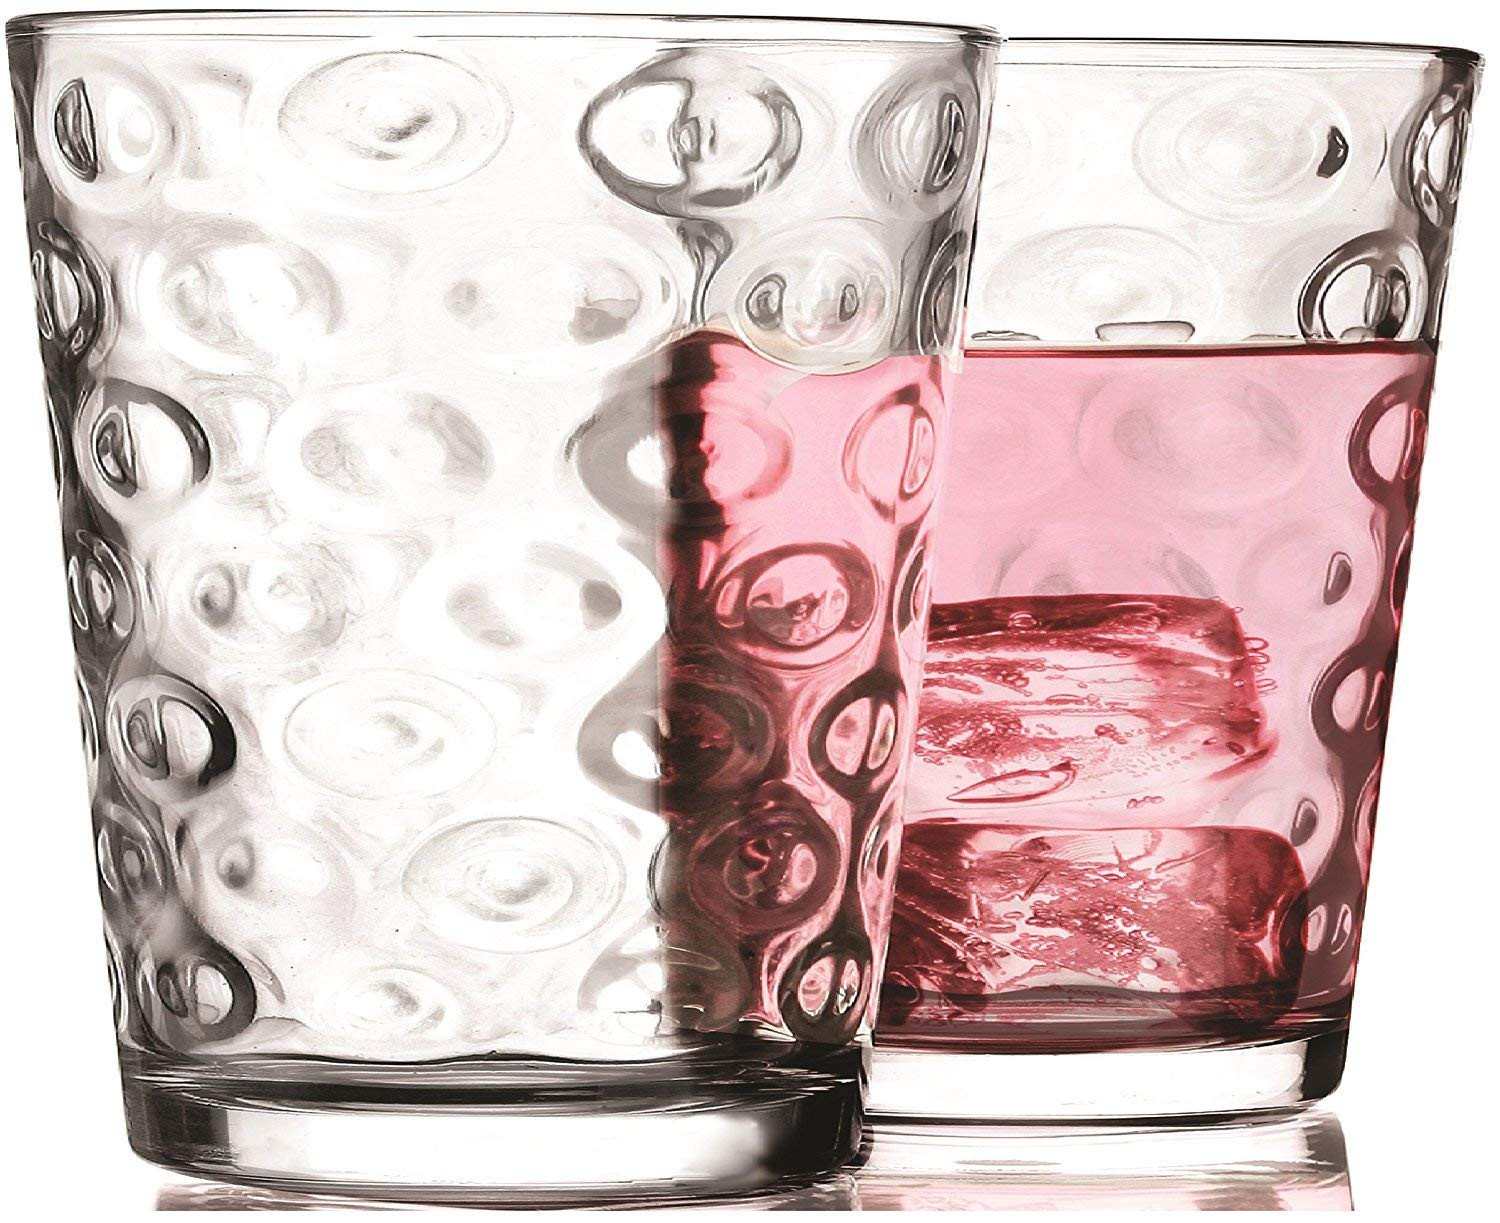 26 Cute Vidrios San Miguel Glass Vase 2024 free download vidrios san miguel glass vase of amazon com circleware 44516 circles drinking glassware products in amazon com circleware 44516 circles drinking glassware products clear mixed drinkware sets